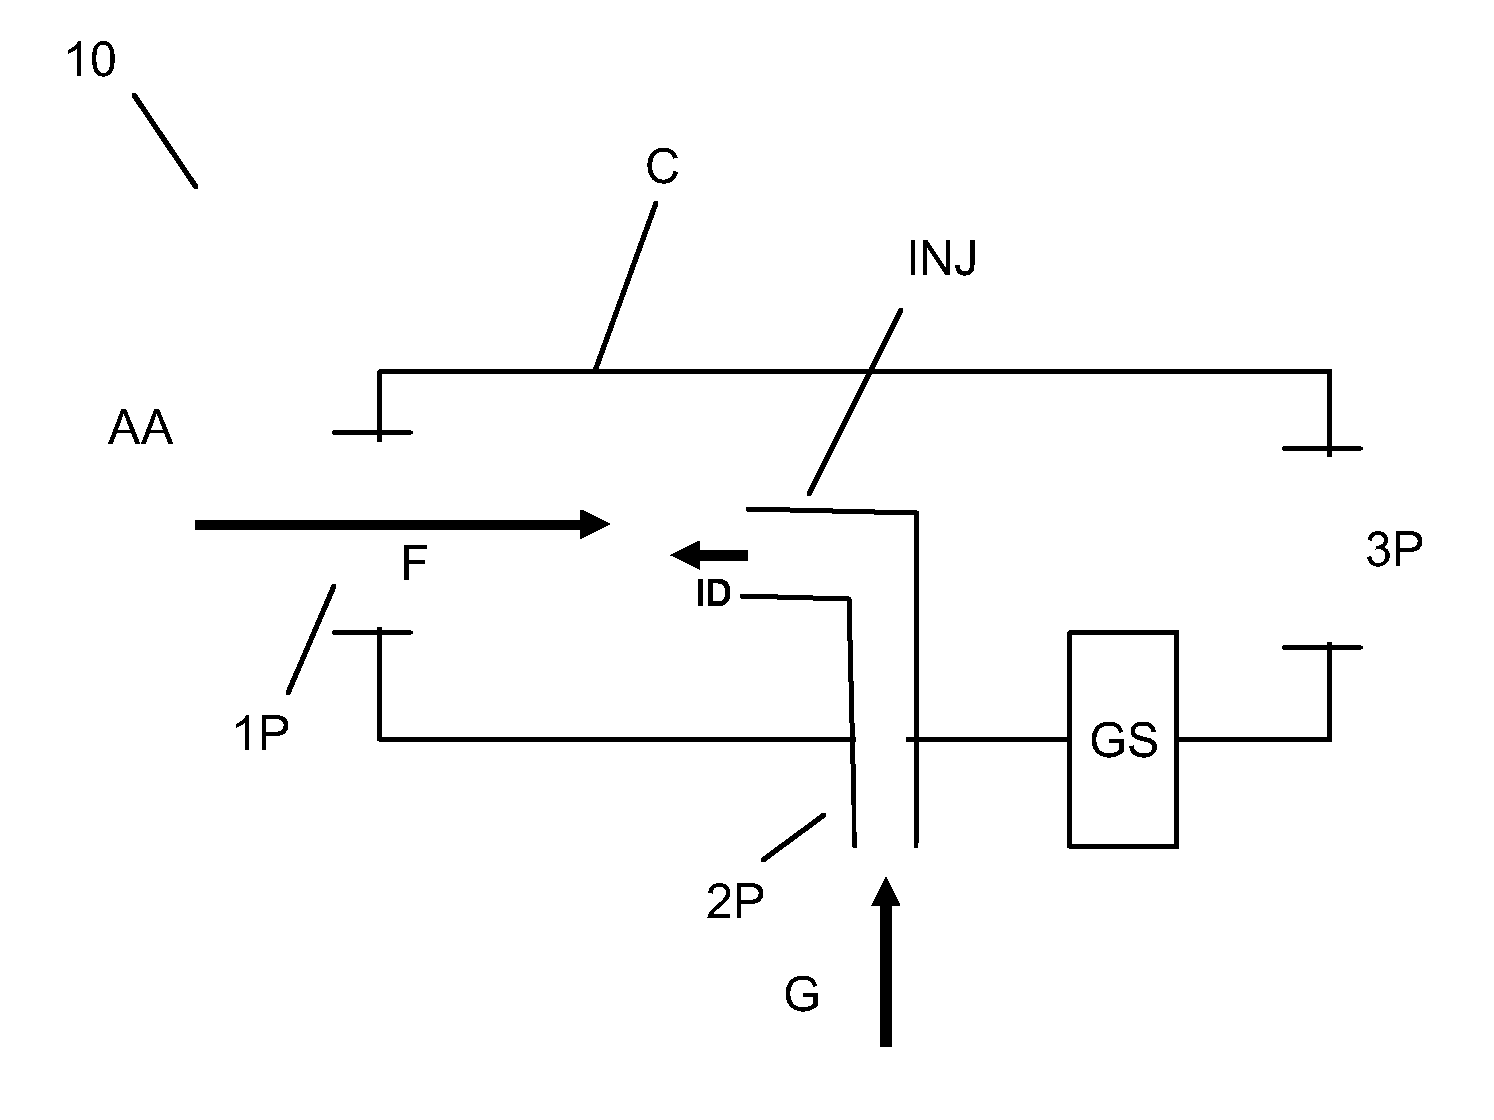 Gas mixing device for an air-way management system